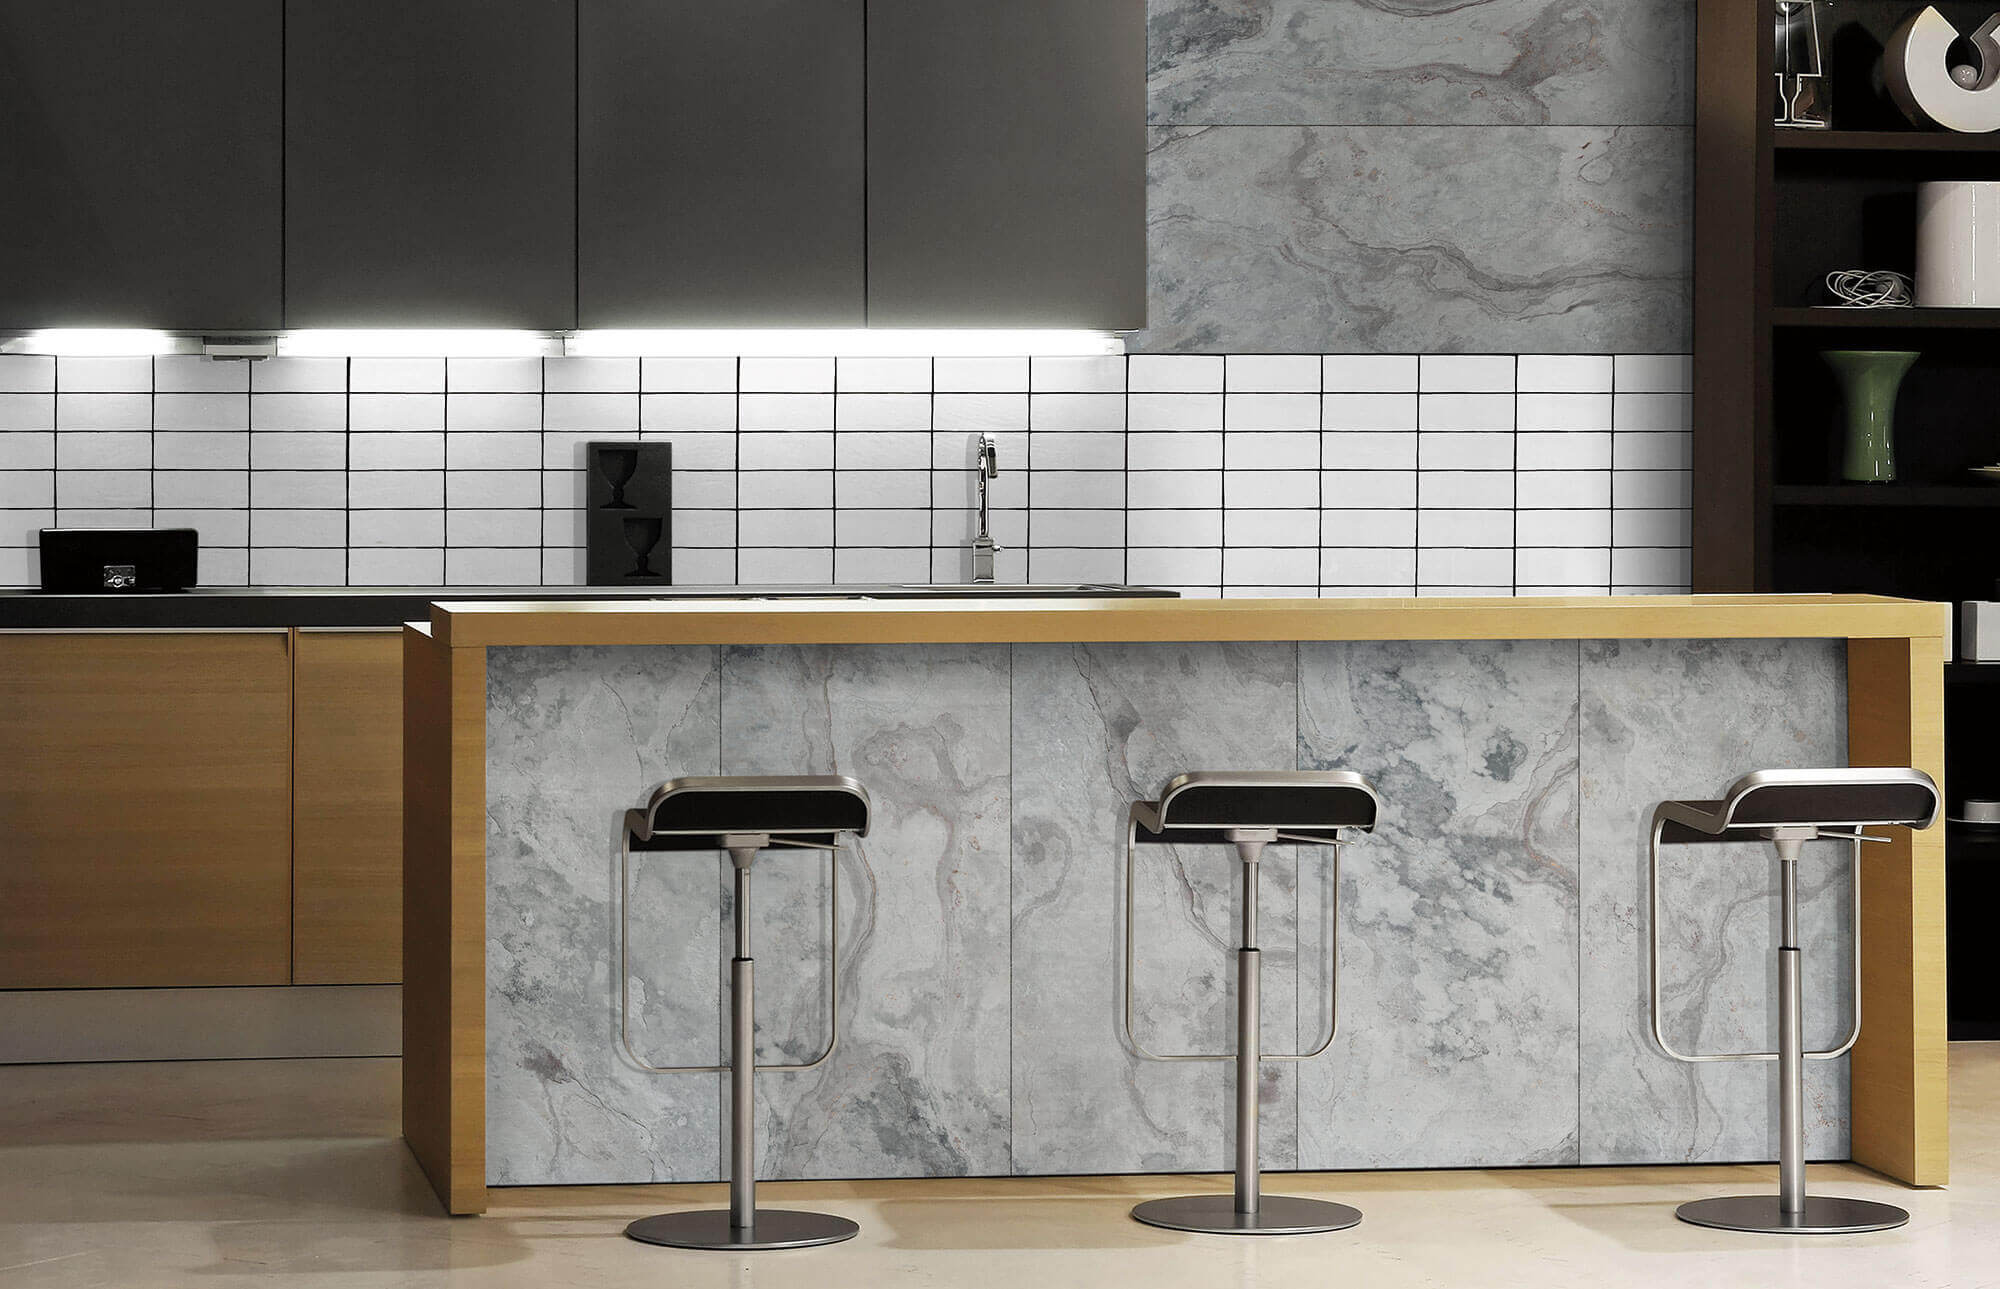 FS6007 - Kitchens with natural stone